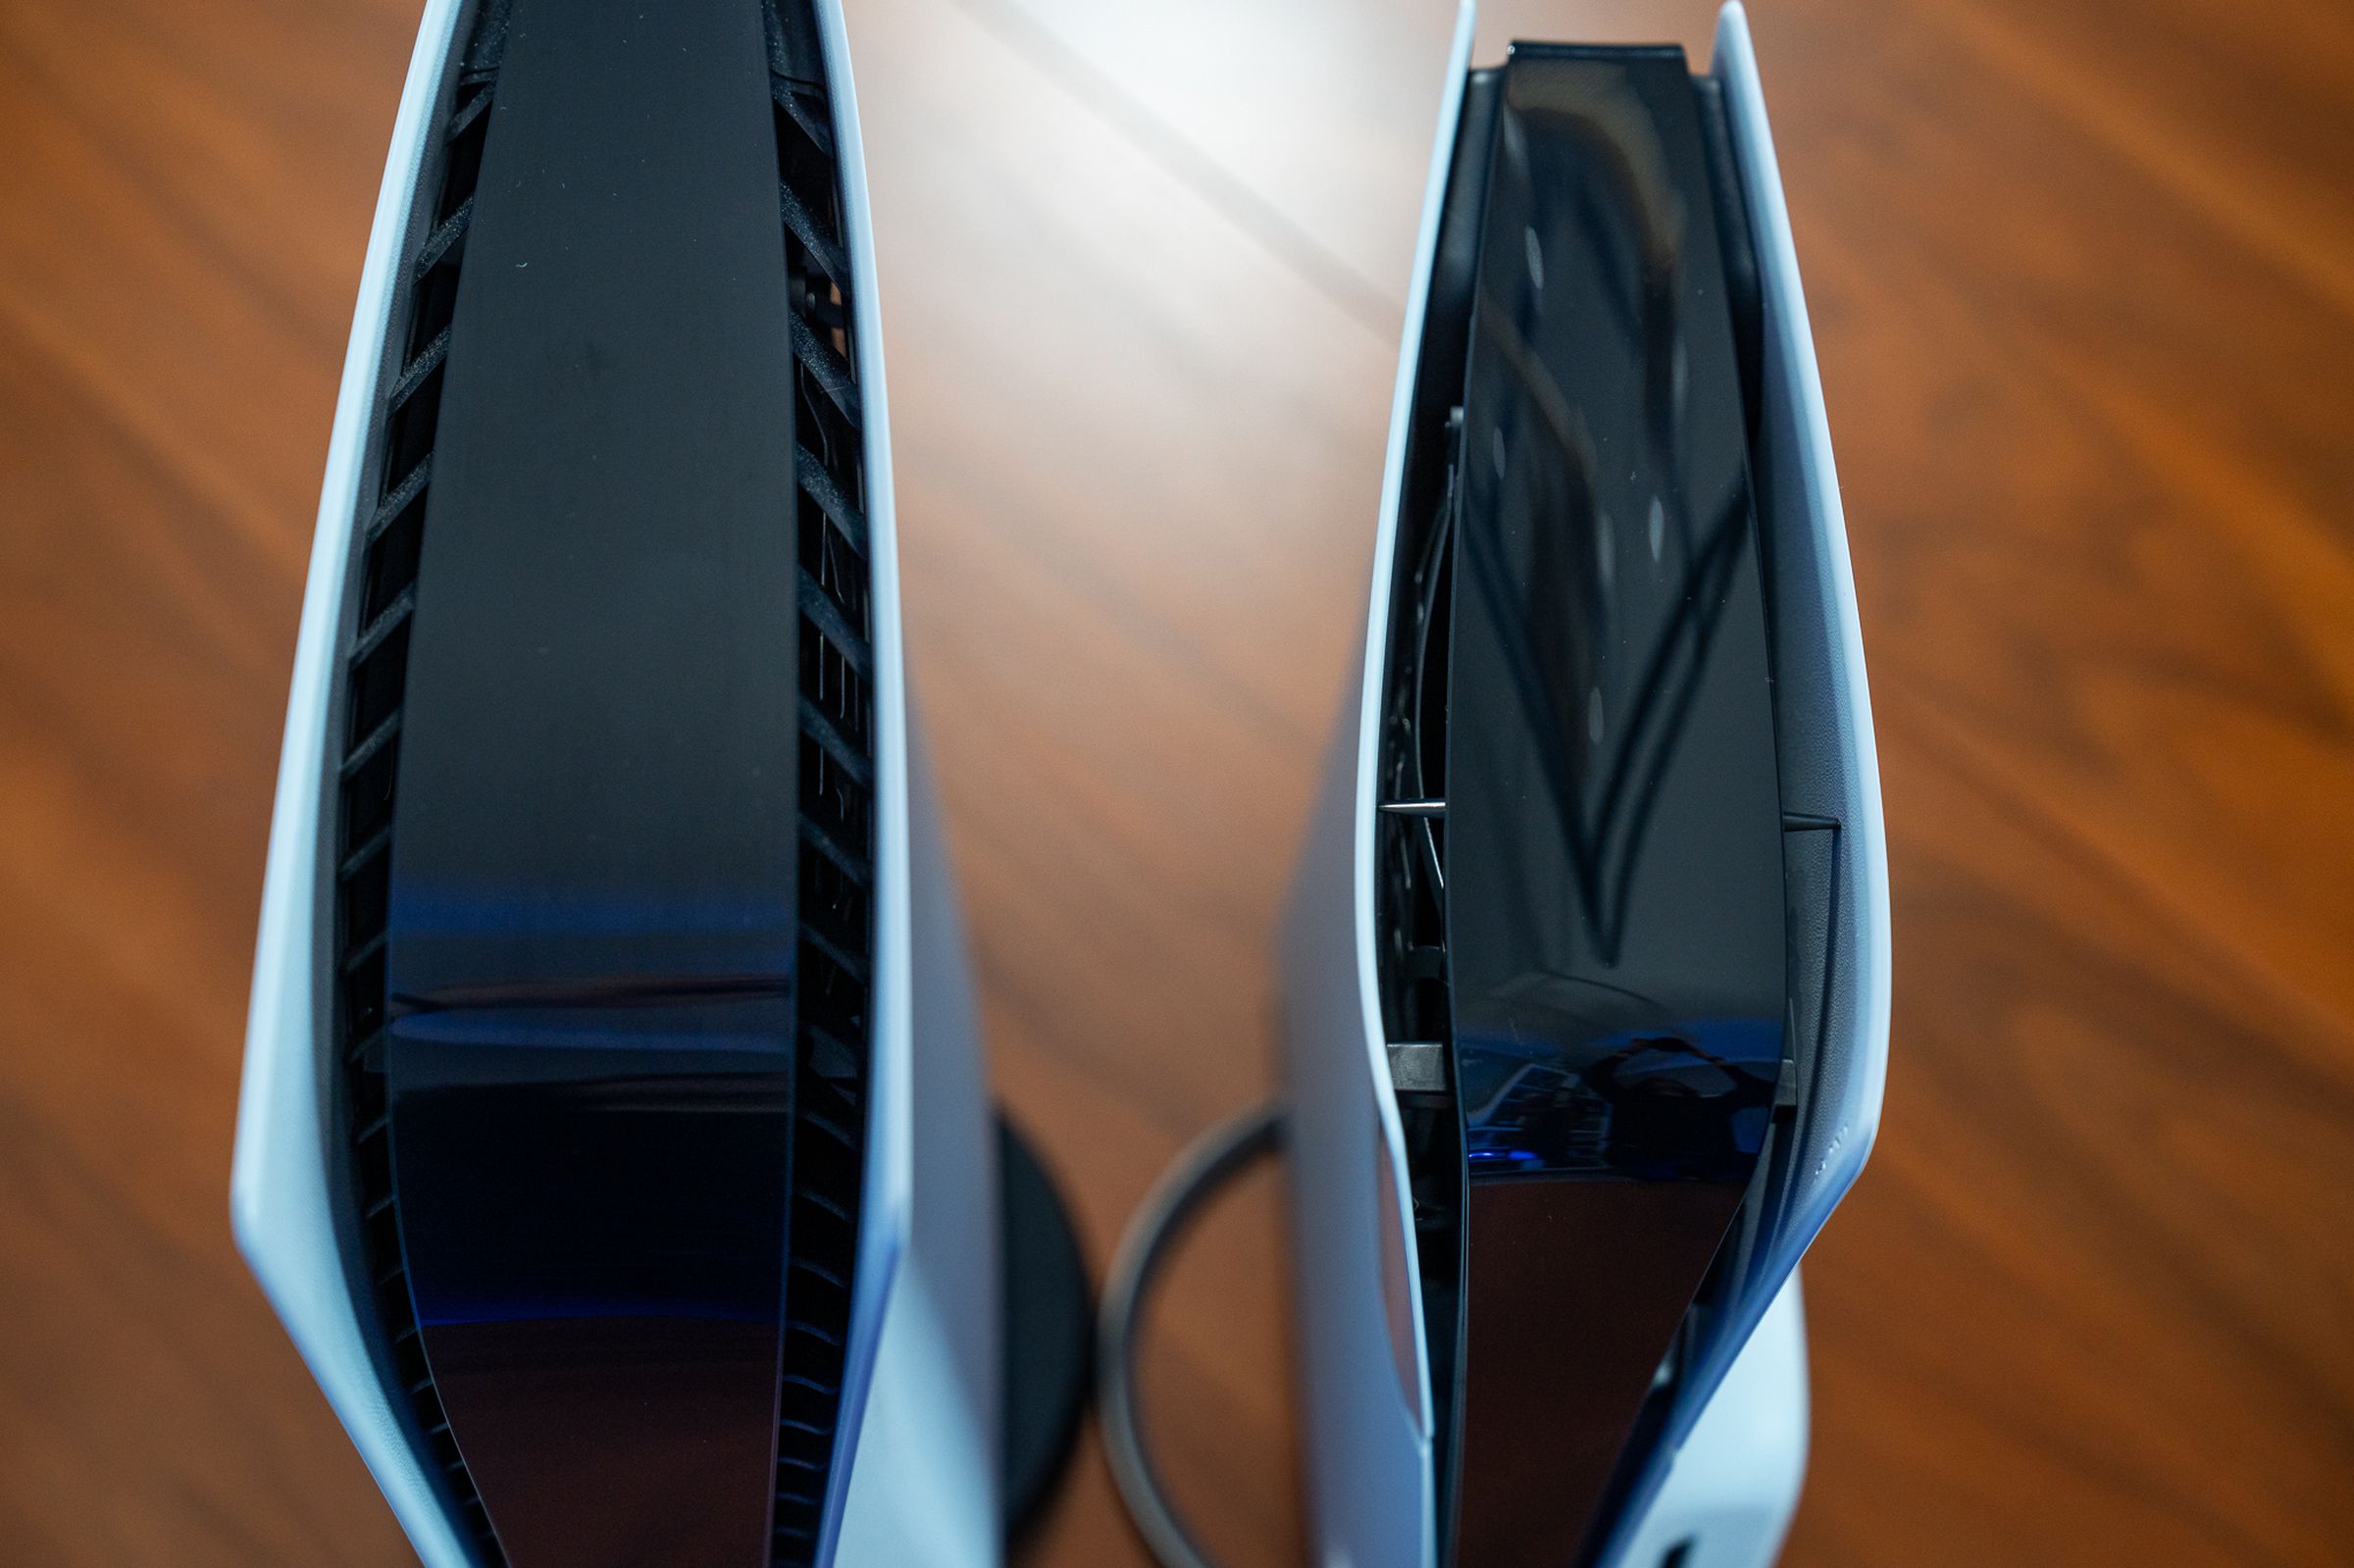 <em>The slim PS5’s vent gaps look a bit unfinished compared to the original’s ribbed fins.</em>